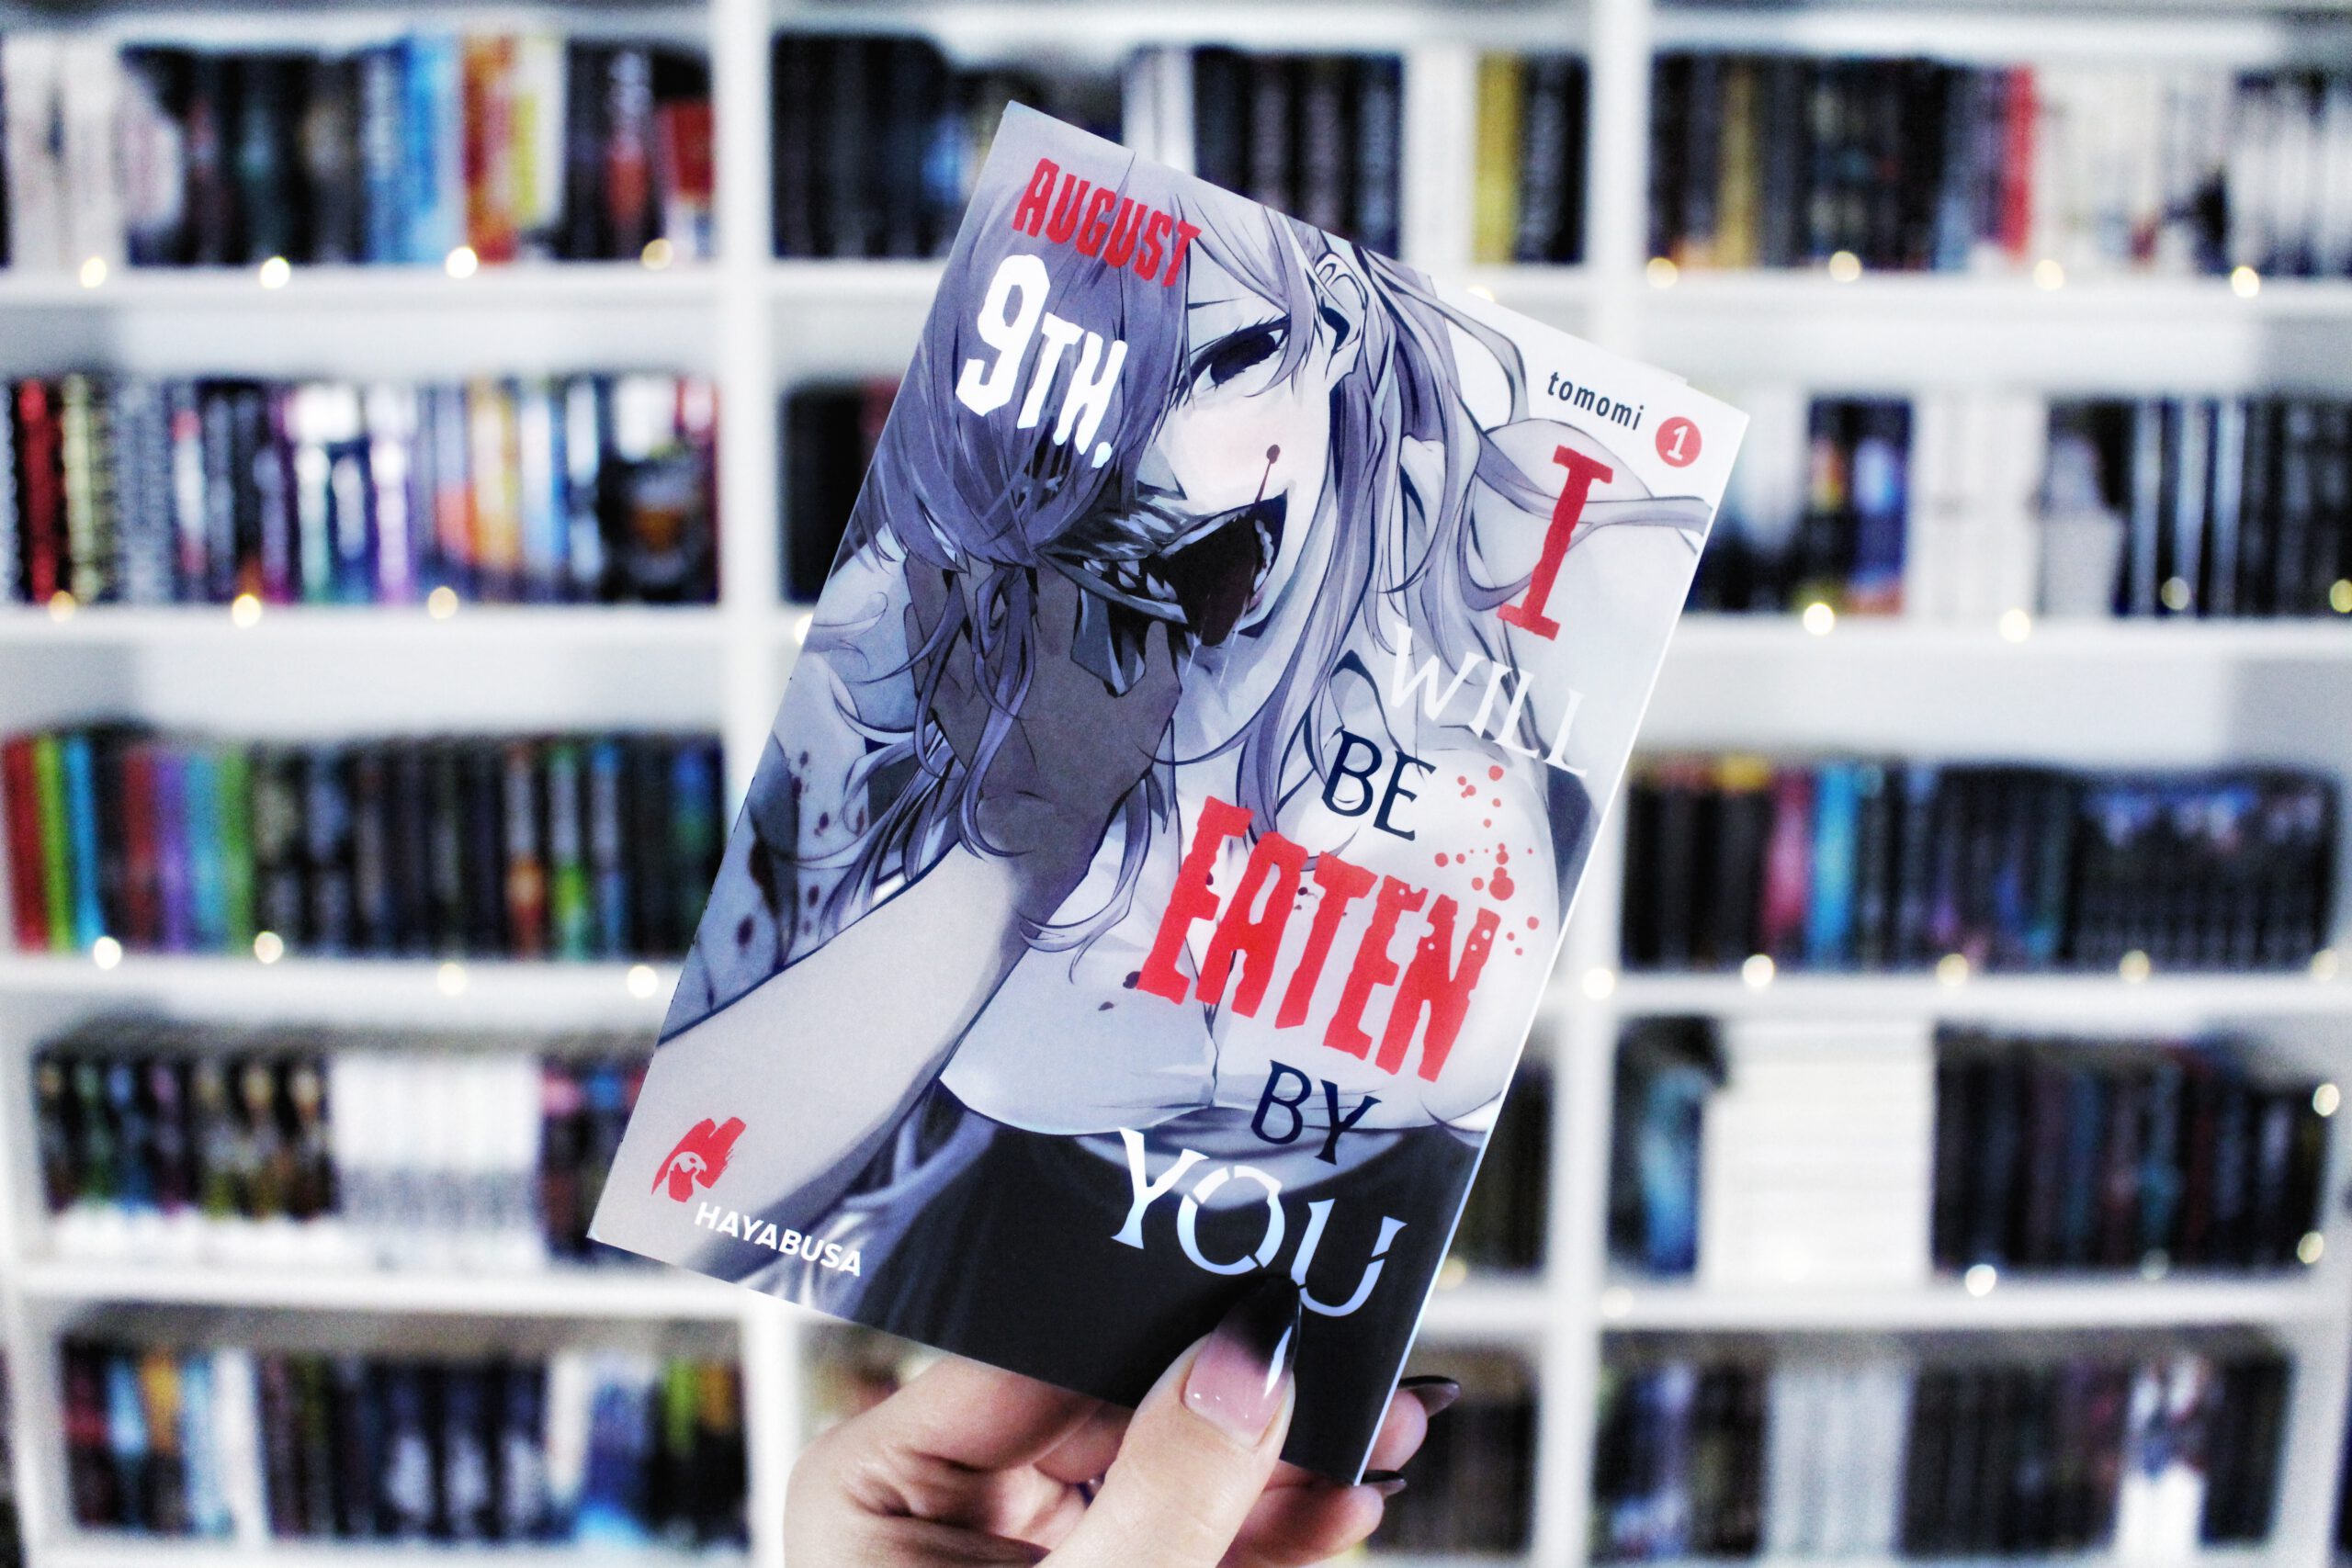 Rezension | August 9th, I will be eaten by you